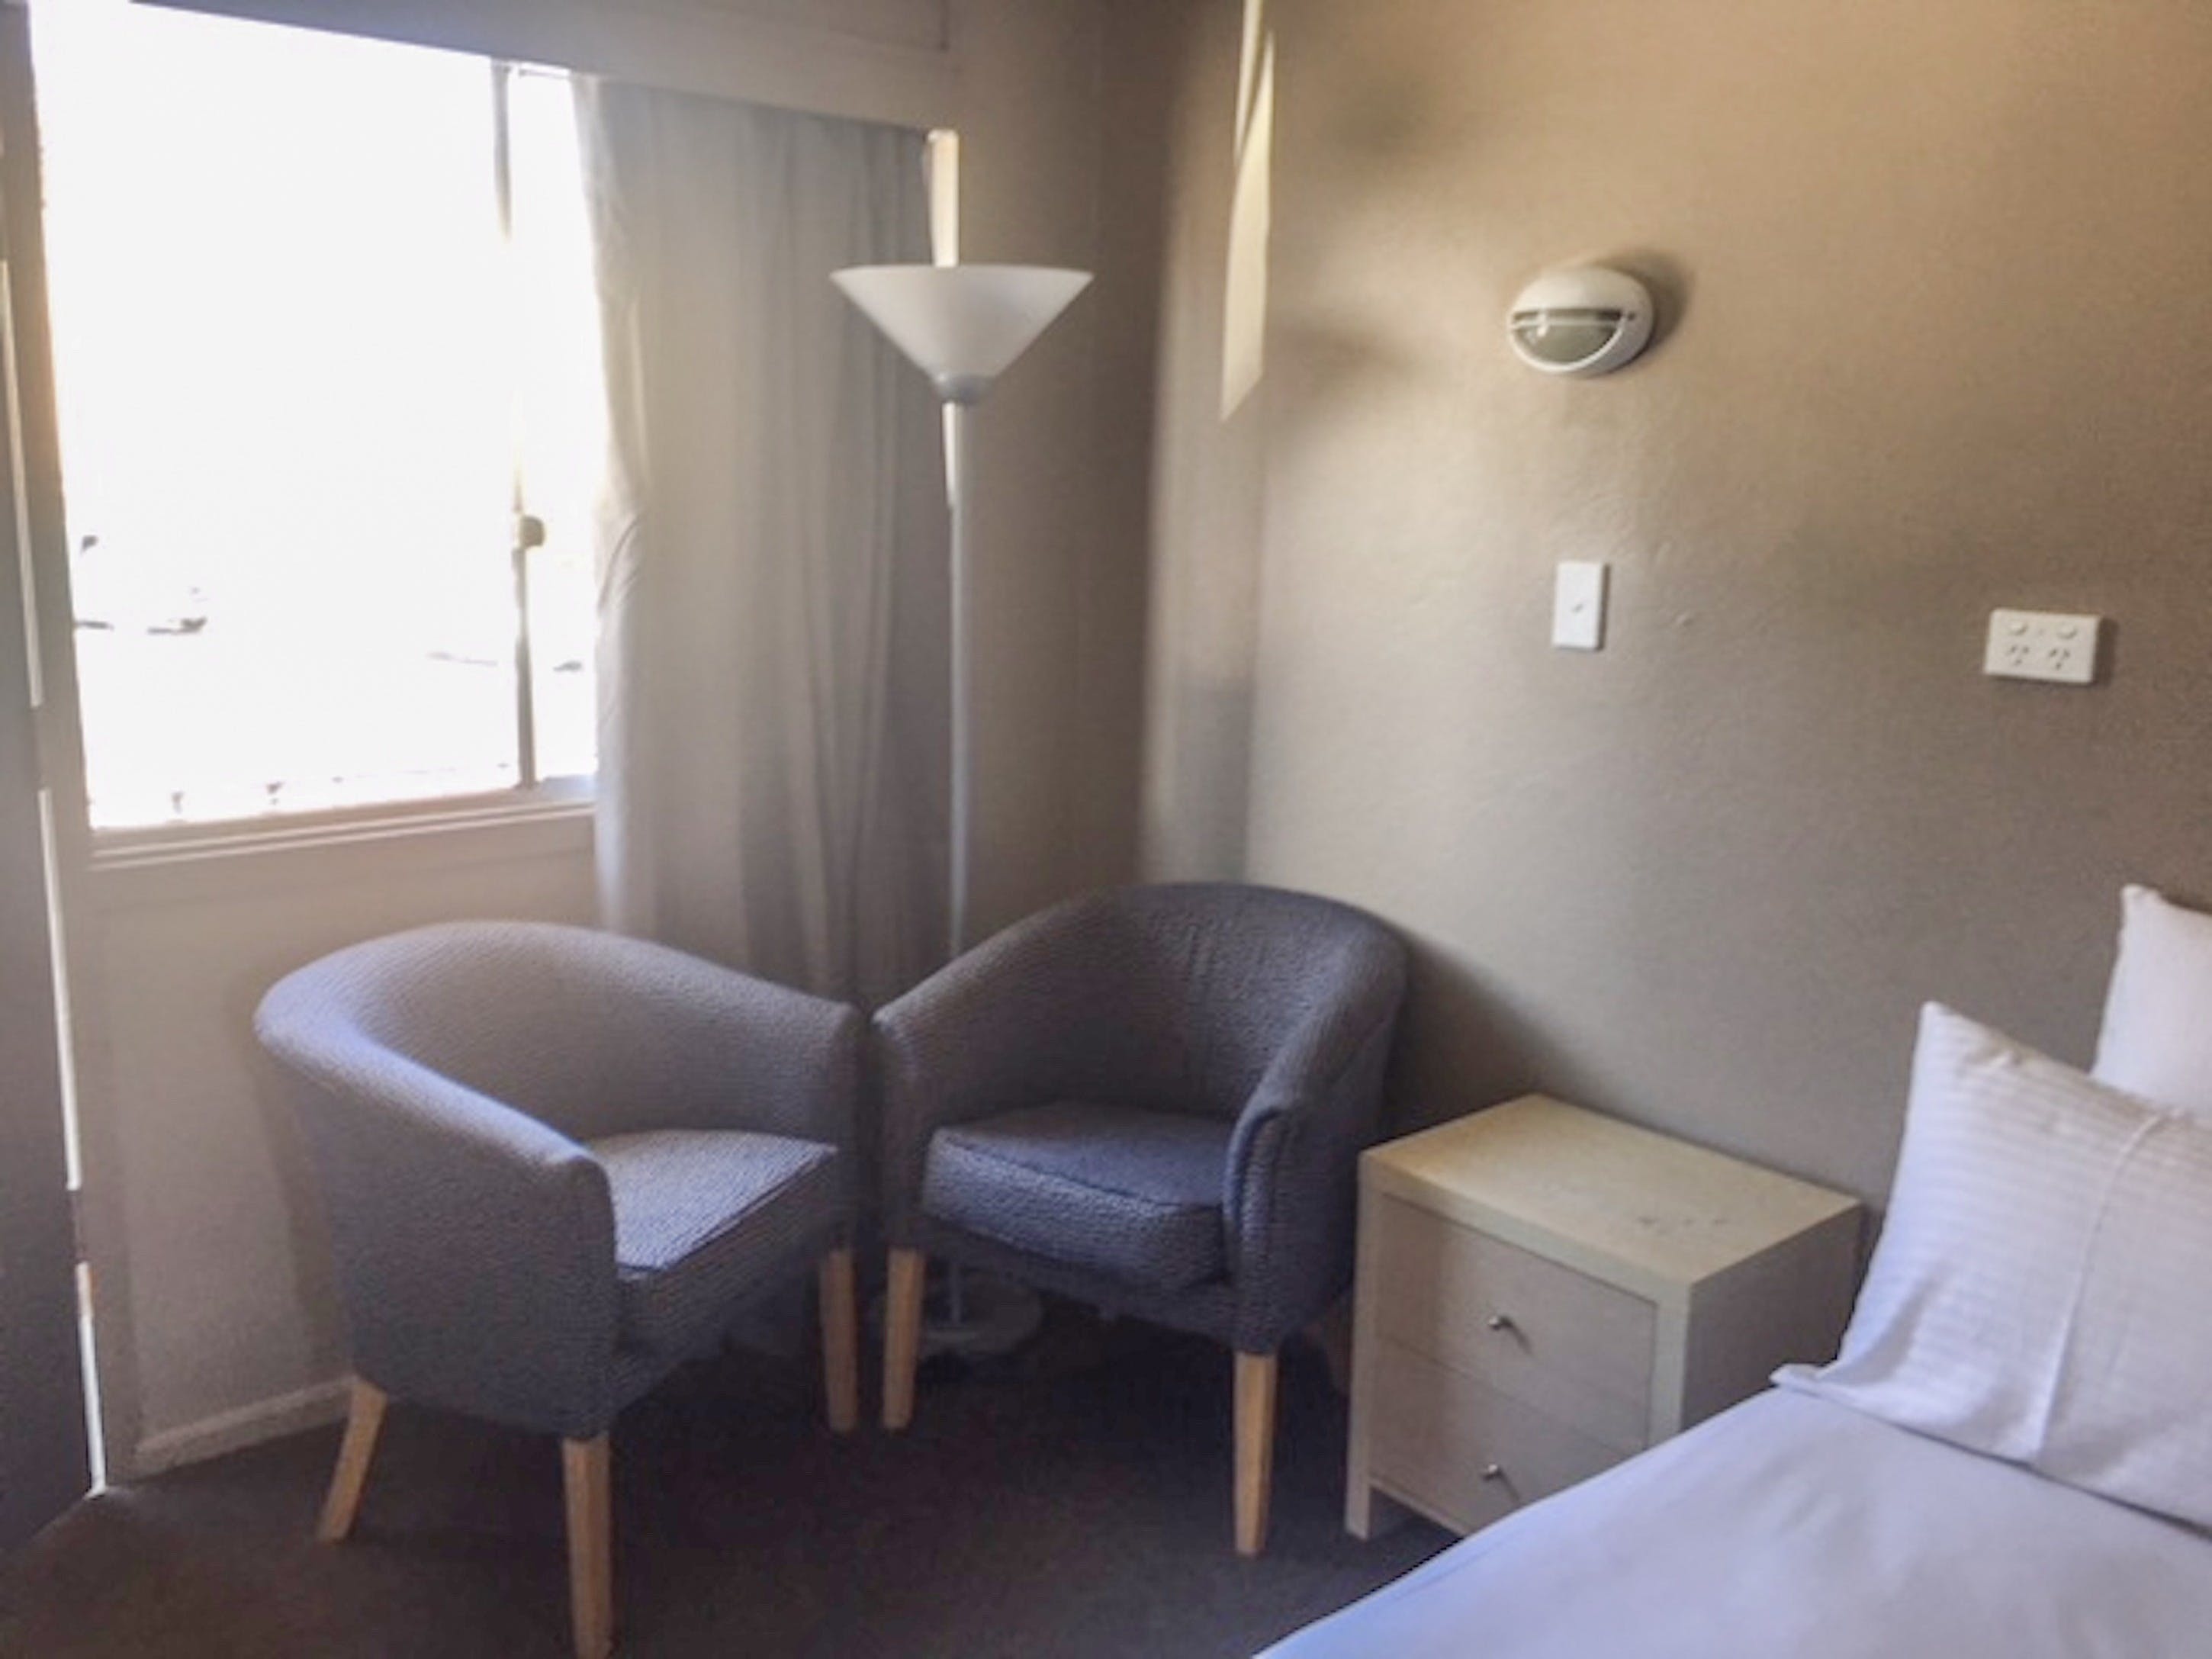 Commercial Hotel Motel Lithgow - Dalby Accommodation